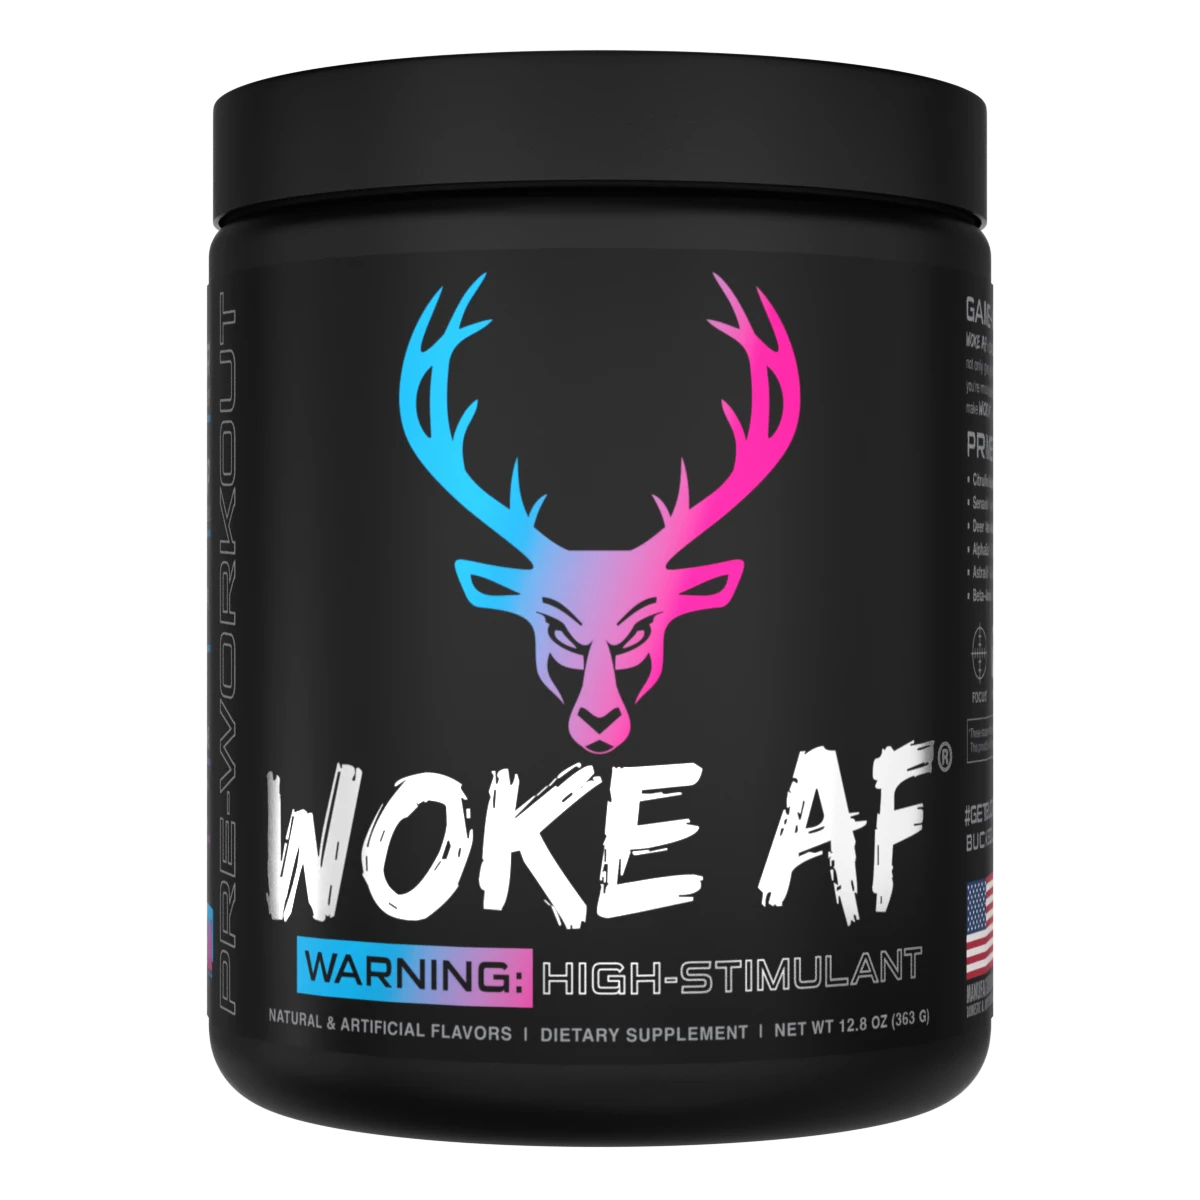 Woke AF Pre-Workout by Bucked Up (DAS)